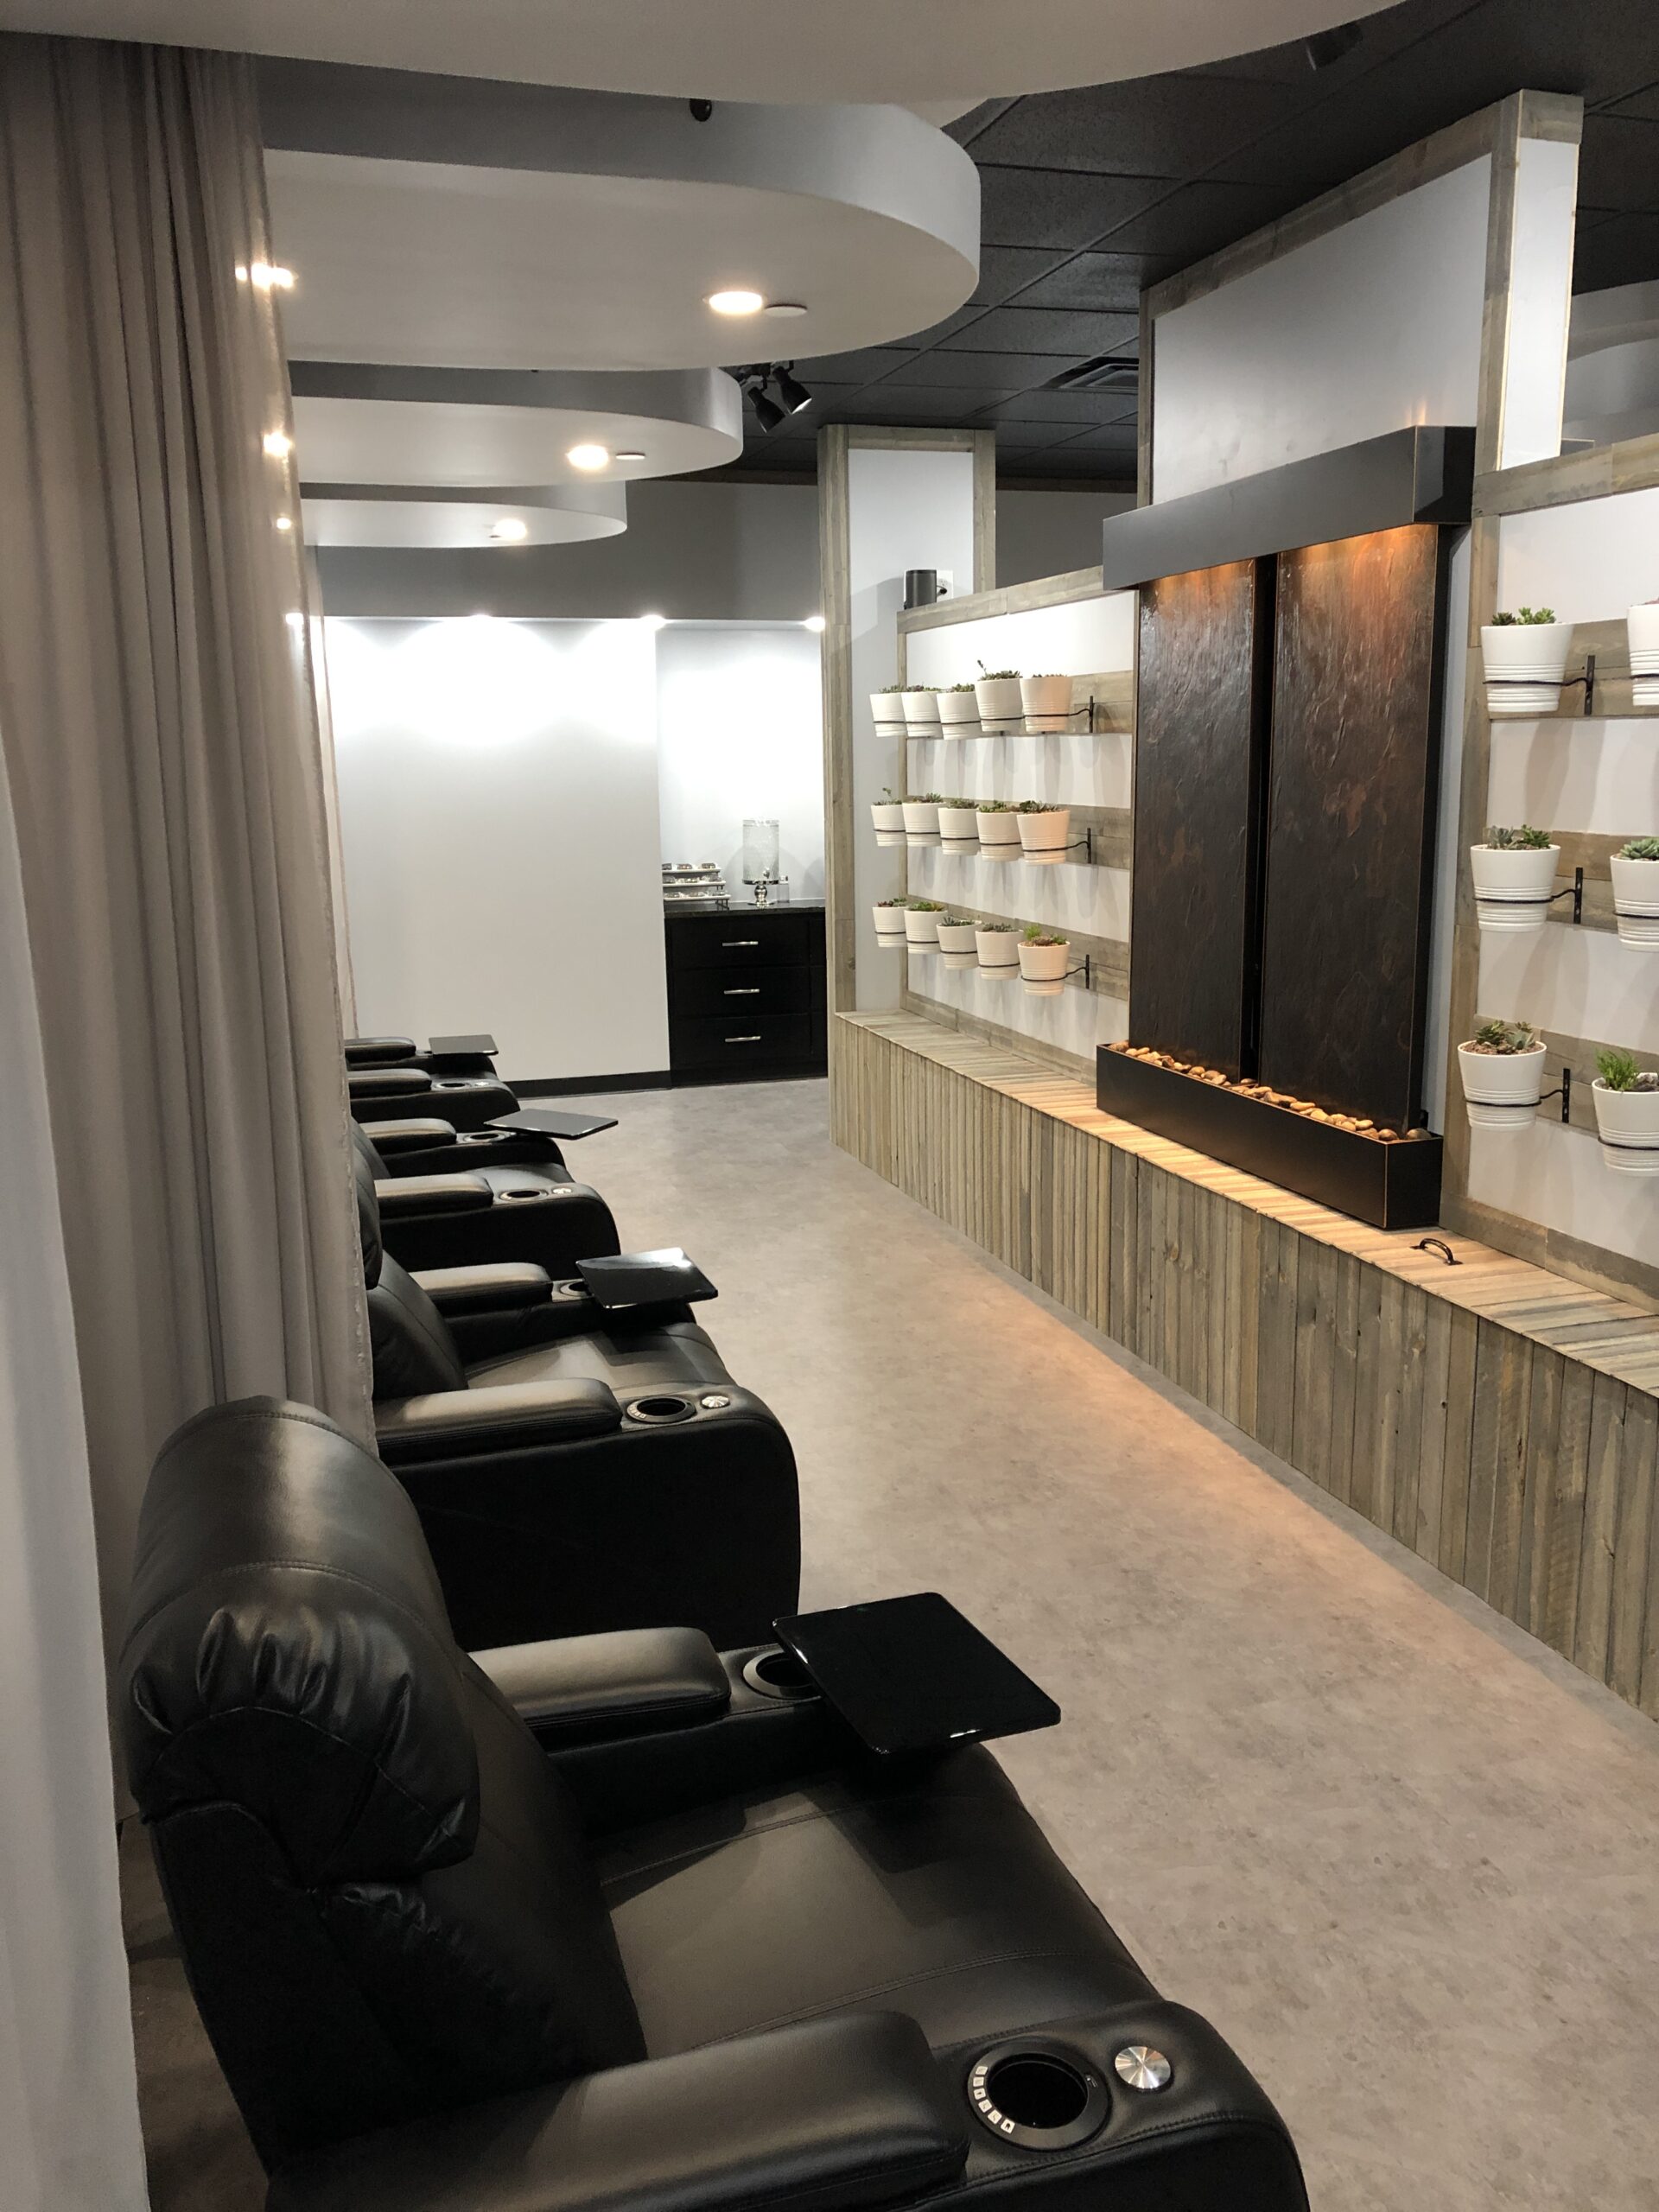 A salon offering drip hydration, iv therapy, and blood testing services, with a wall of mirrors.